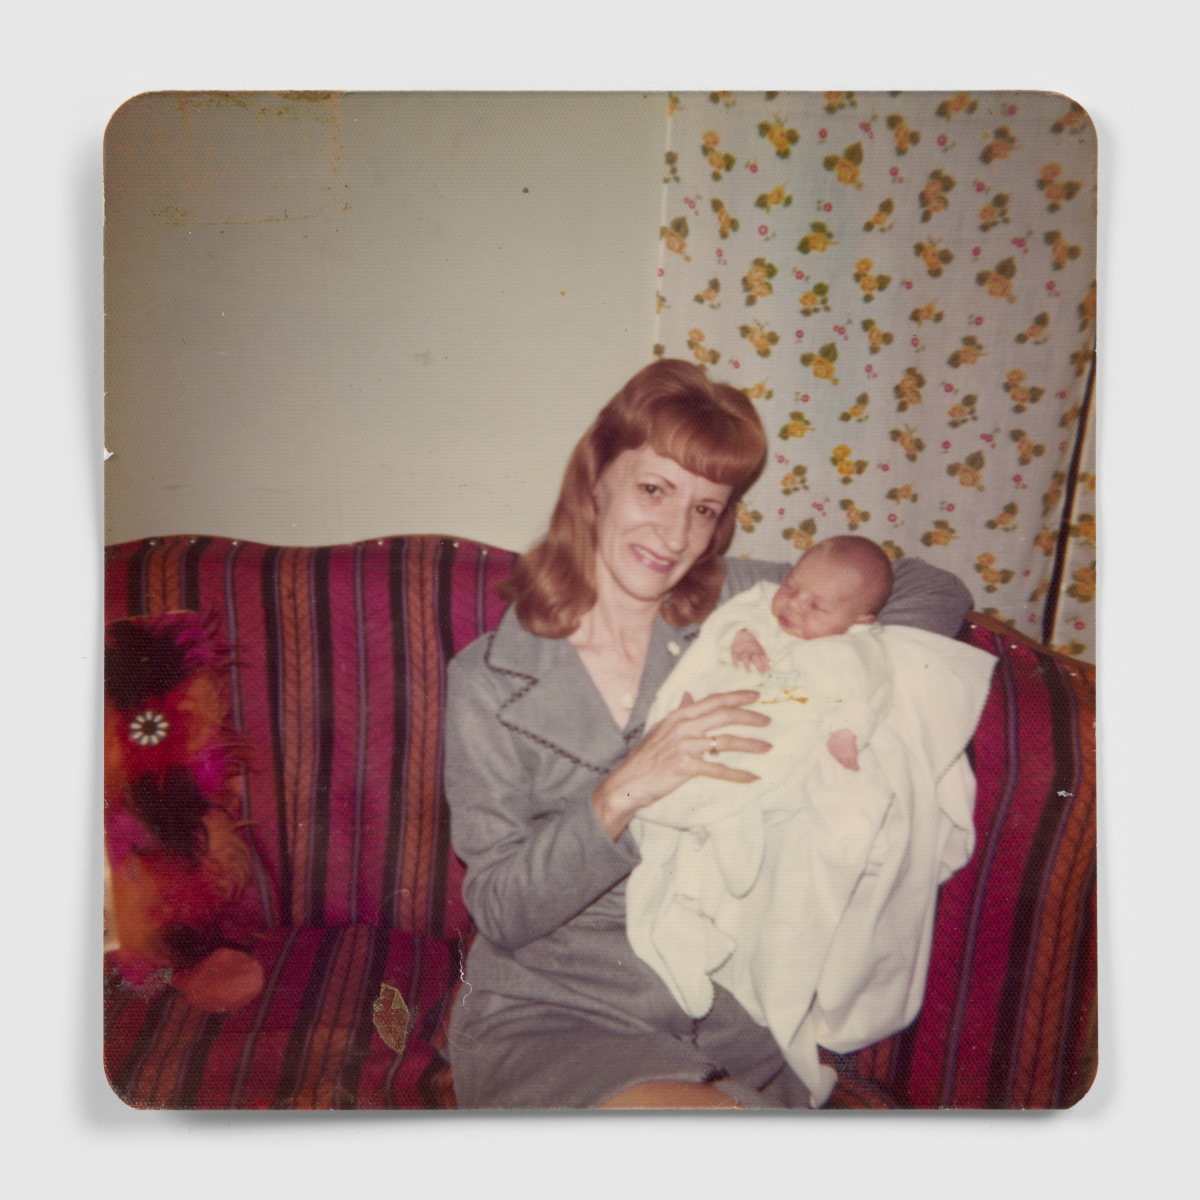 Photograph of woman holding a baby